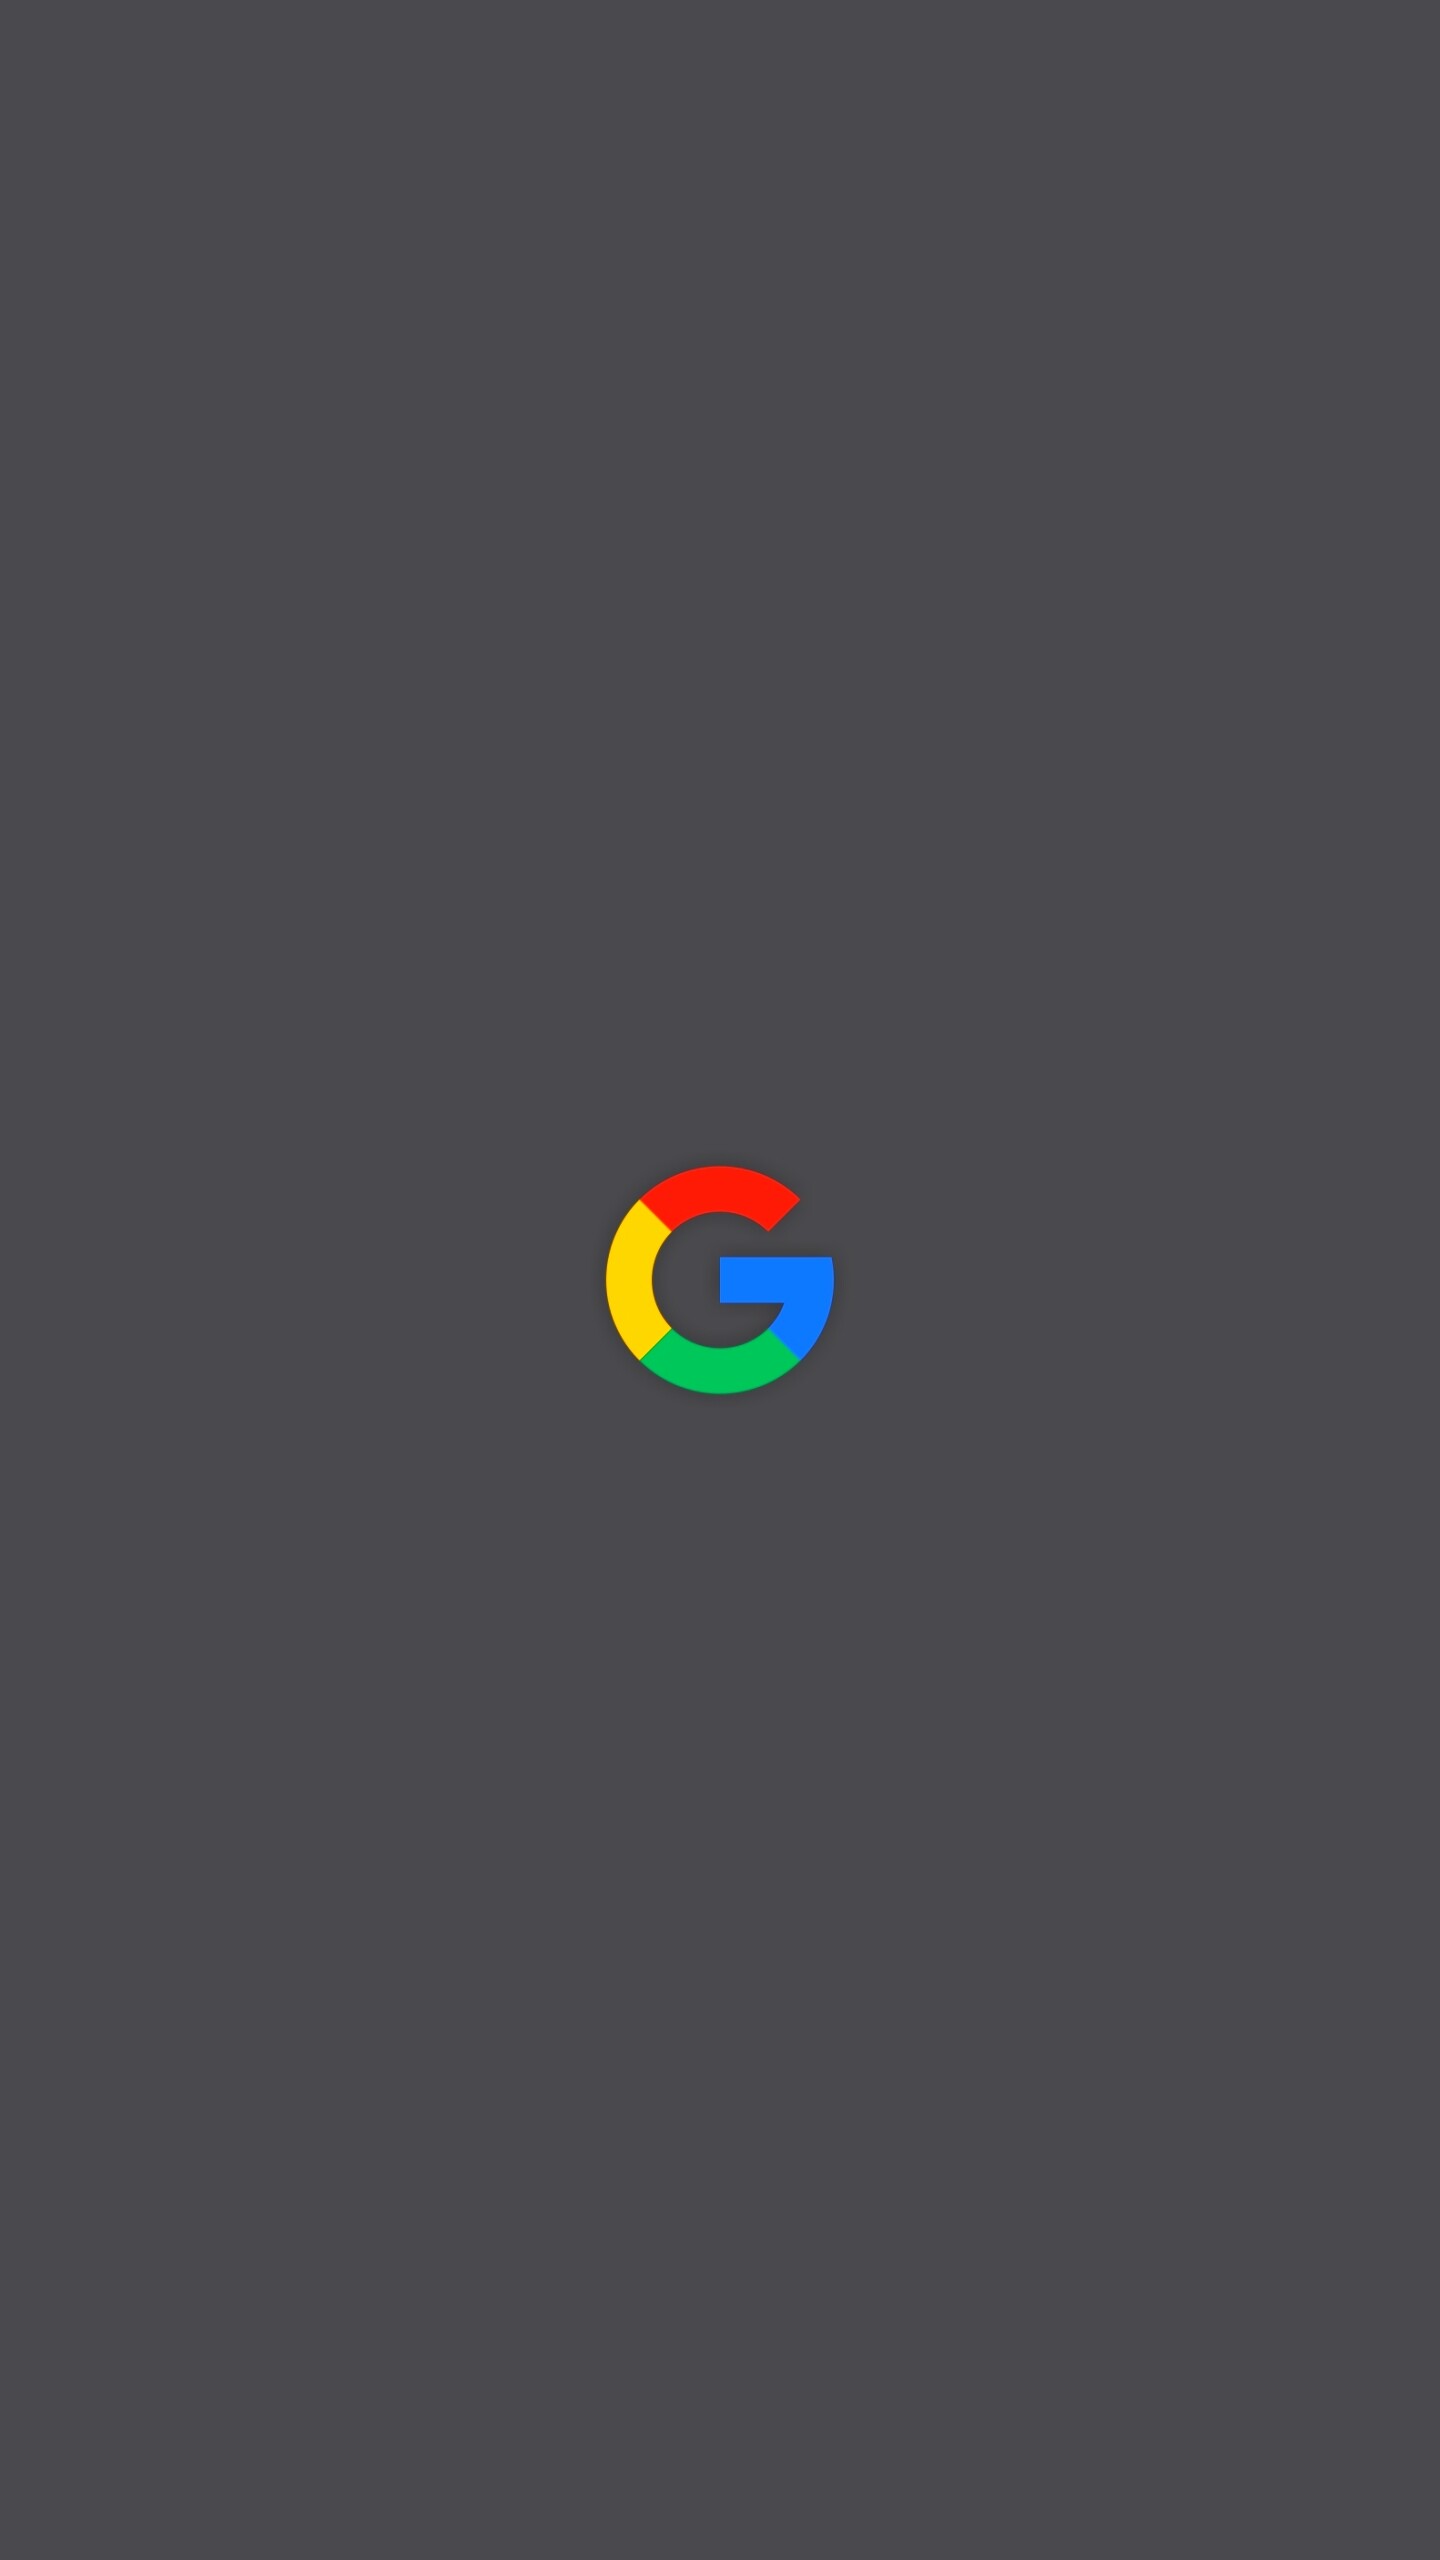 Google: Has developed several open source projects, such as Android, Chrome, and TensorFlow. 1440x2560 HD Wallpaper.